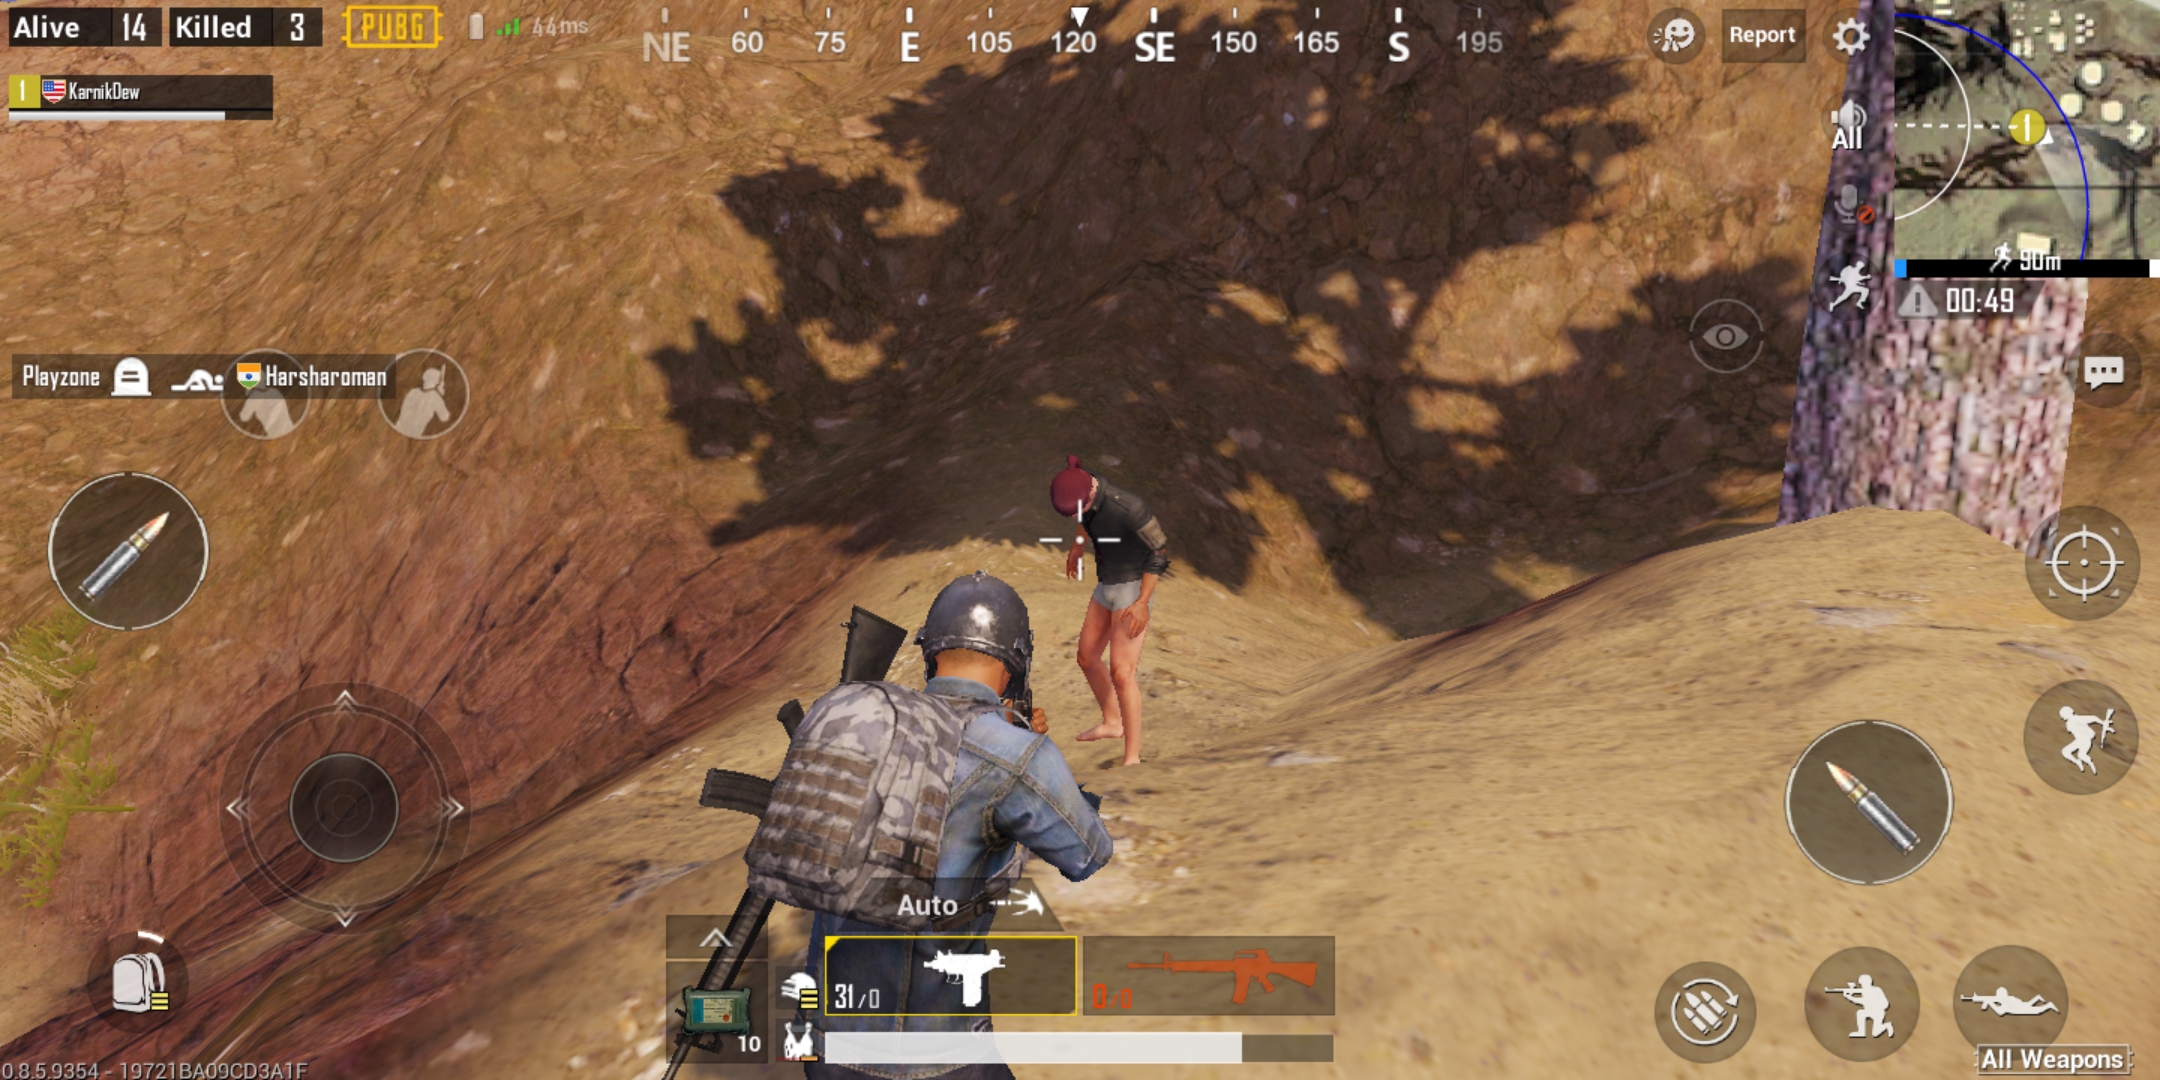 Image showing gameplay screenshot from PUBG Mobile